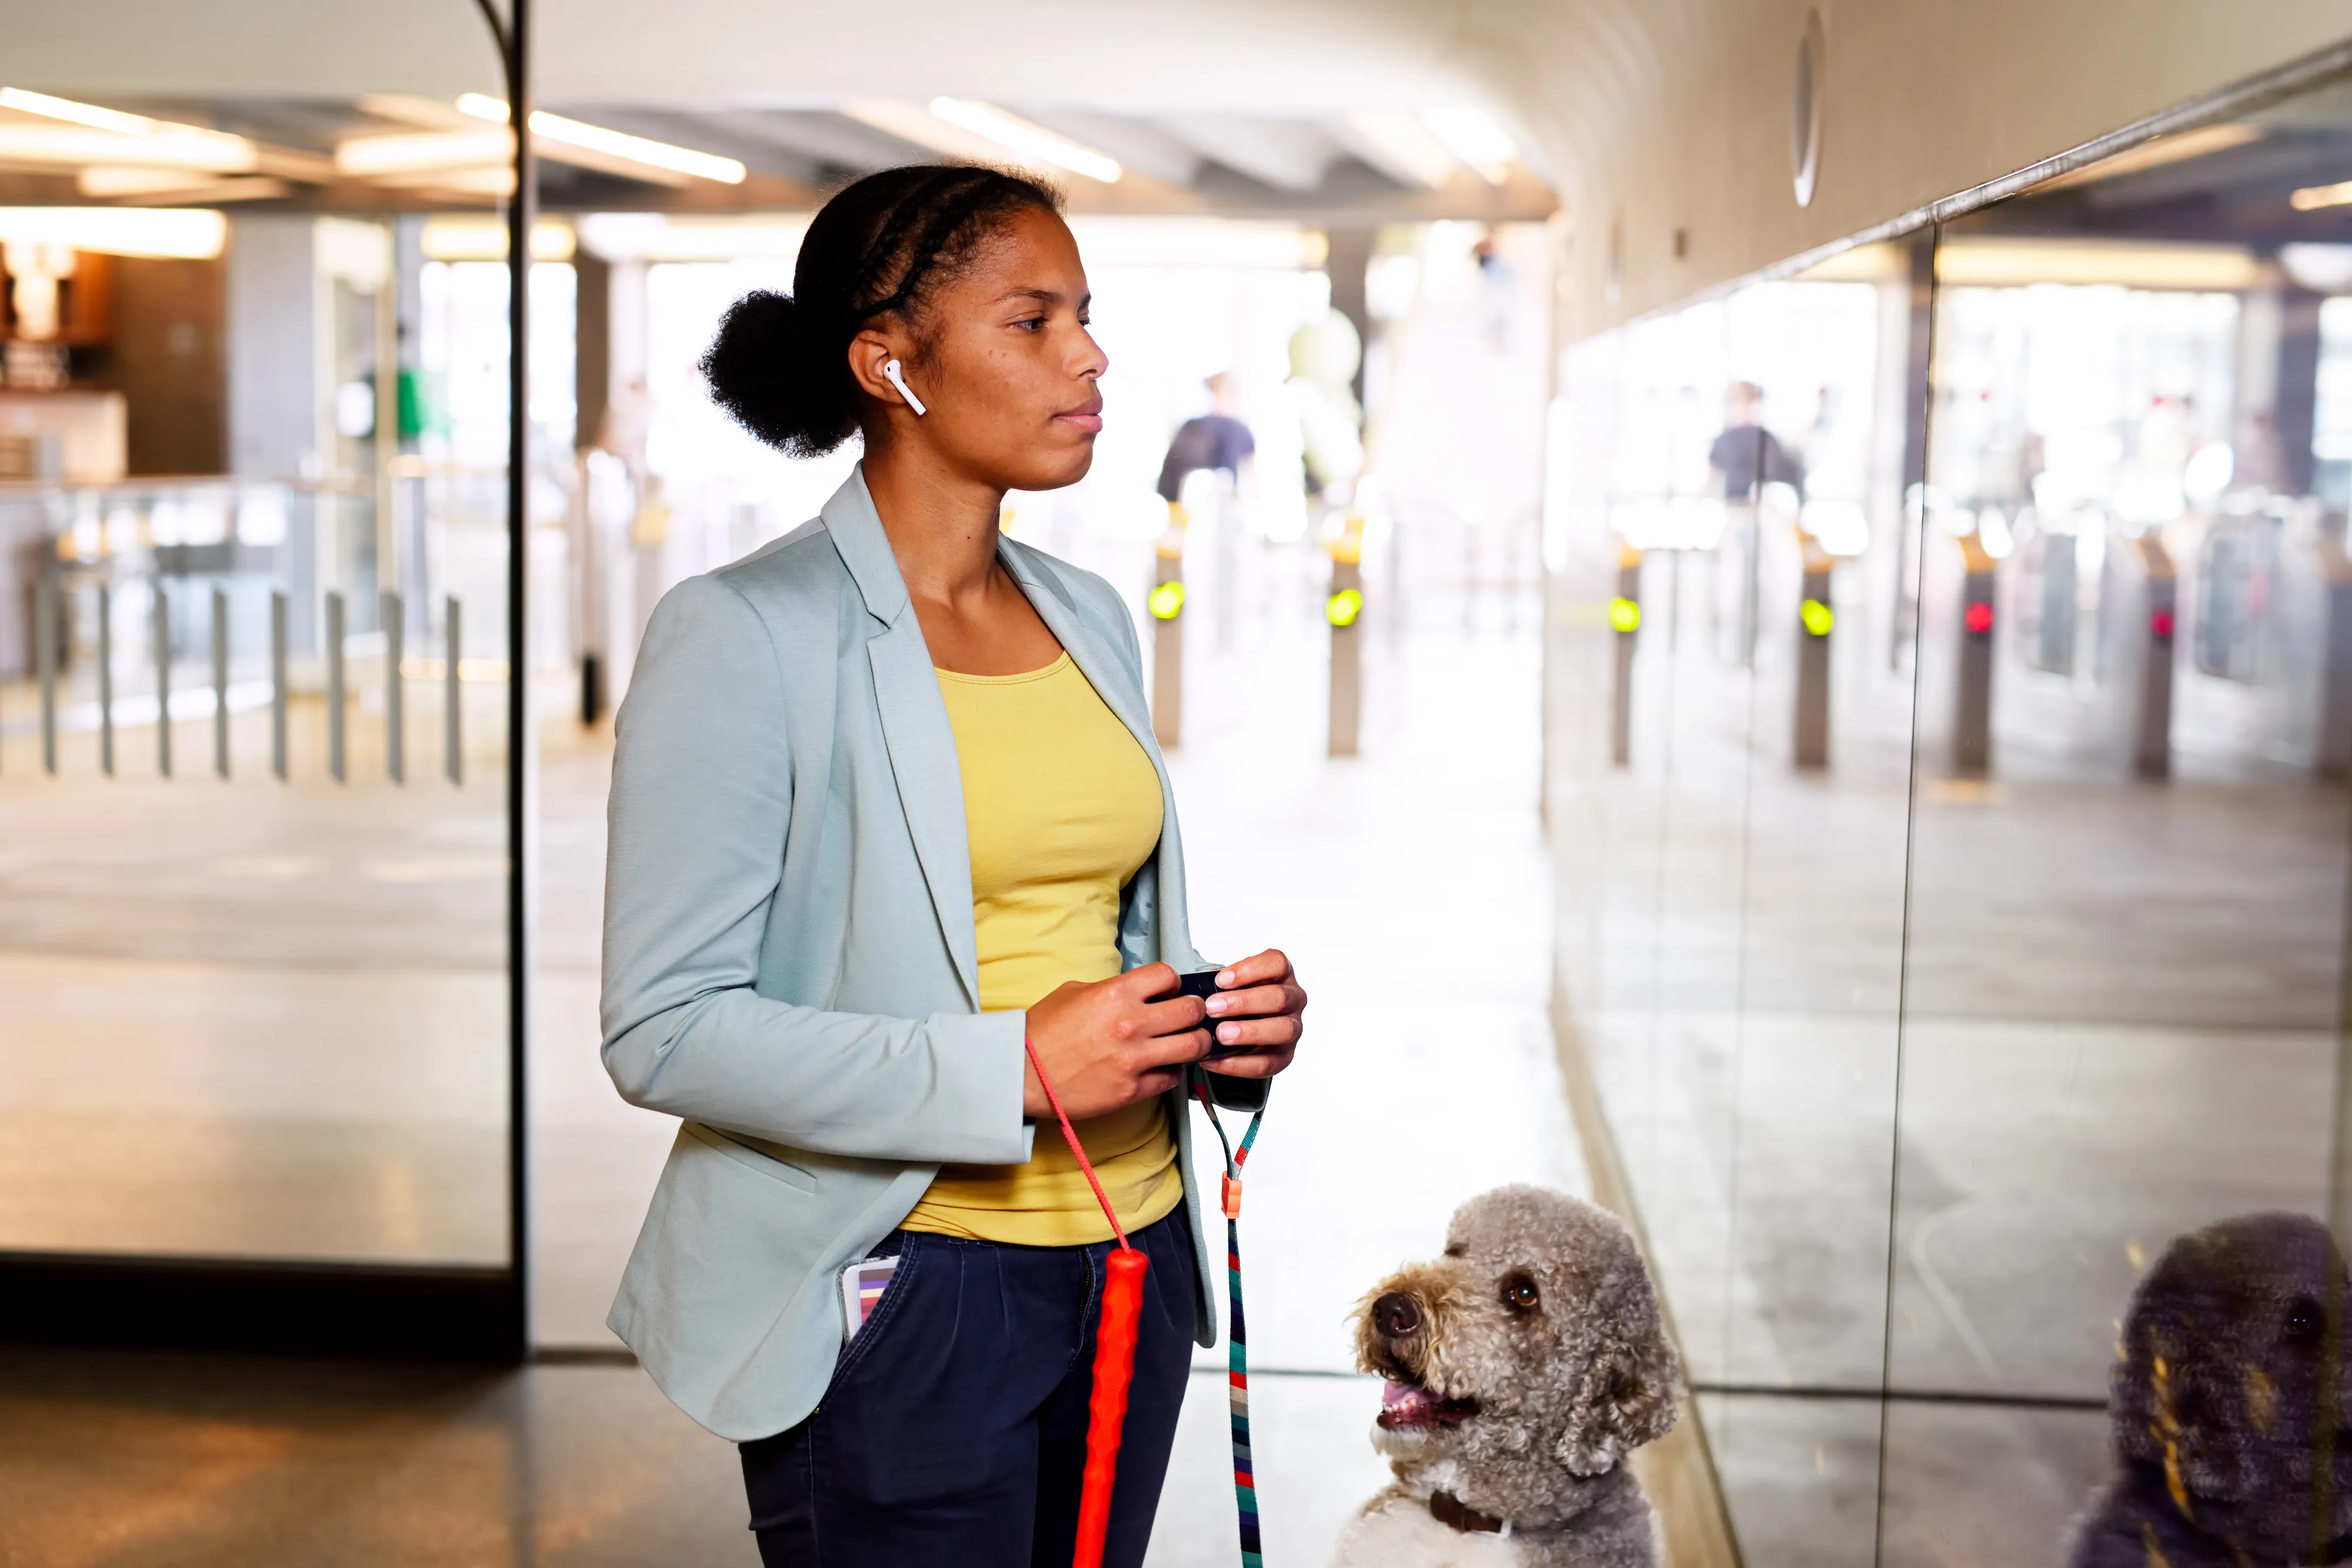 Woman holding a Hable One at the Eindhoven Centraal Train Station. Next to here we have her guide dog that is looking towards her.